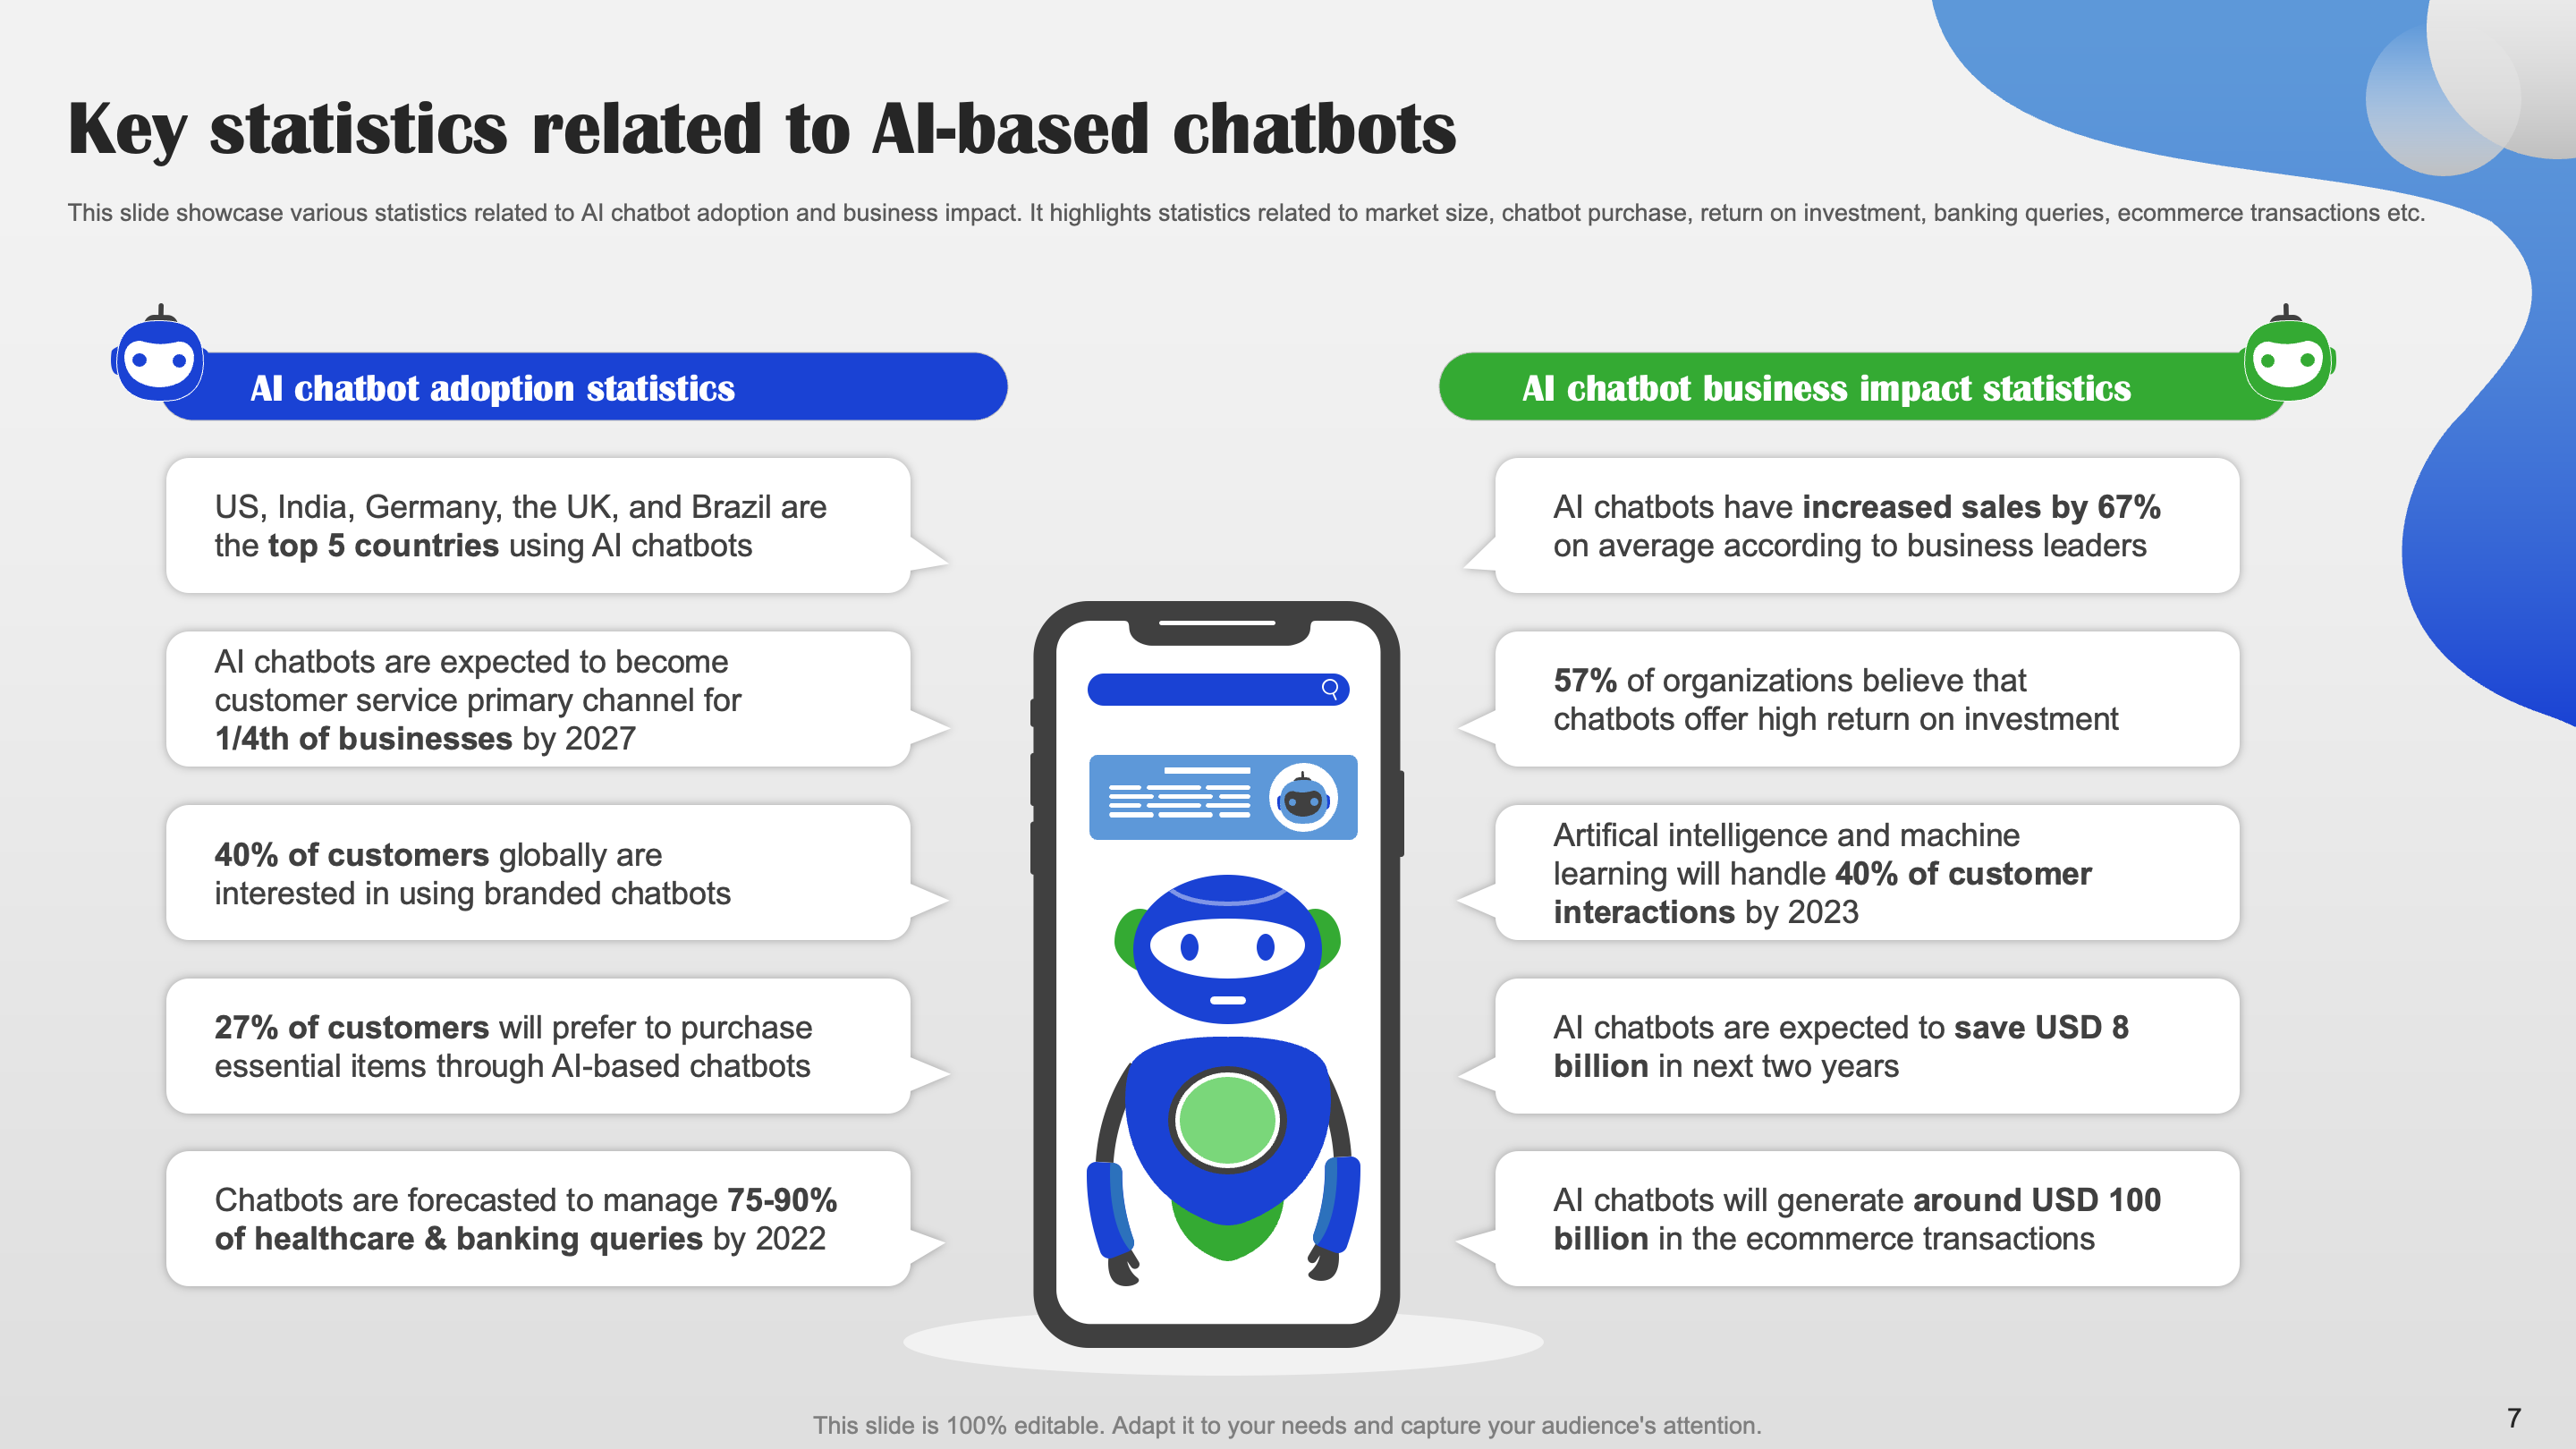 Key Statistics Related to AI-based Chatbots